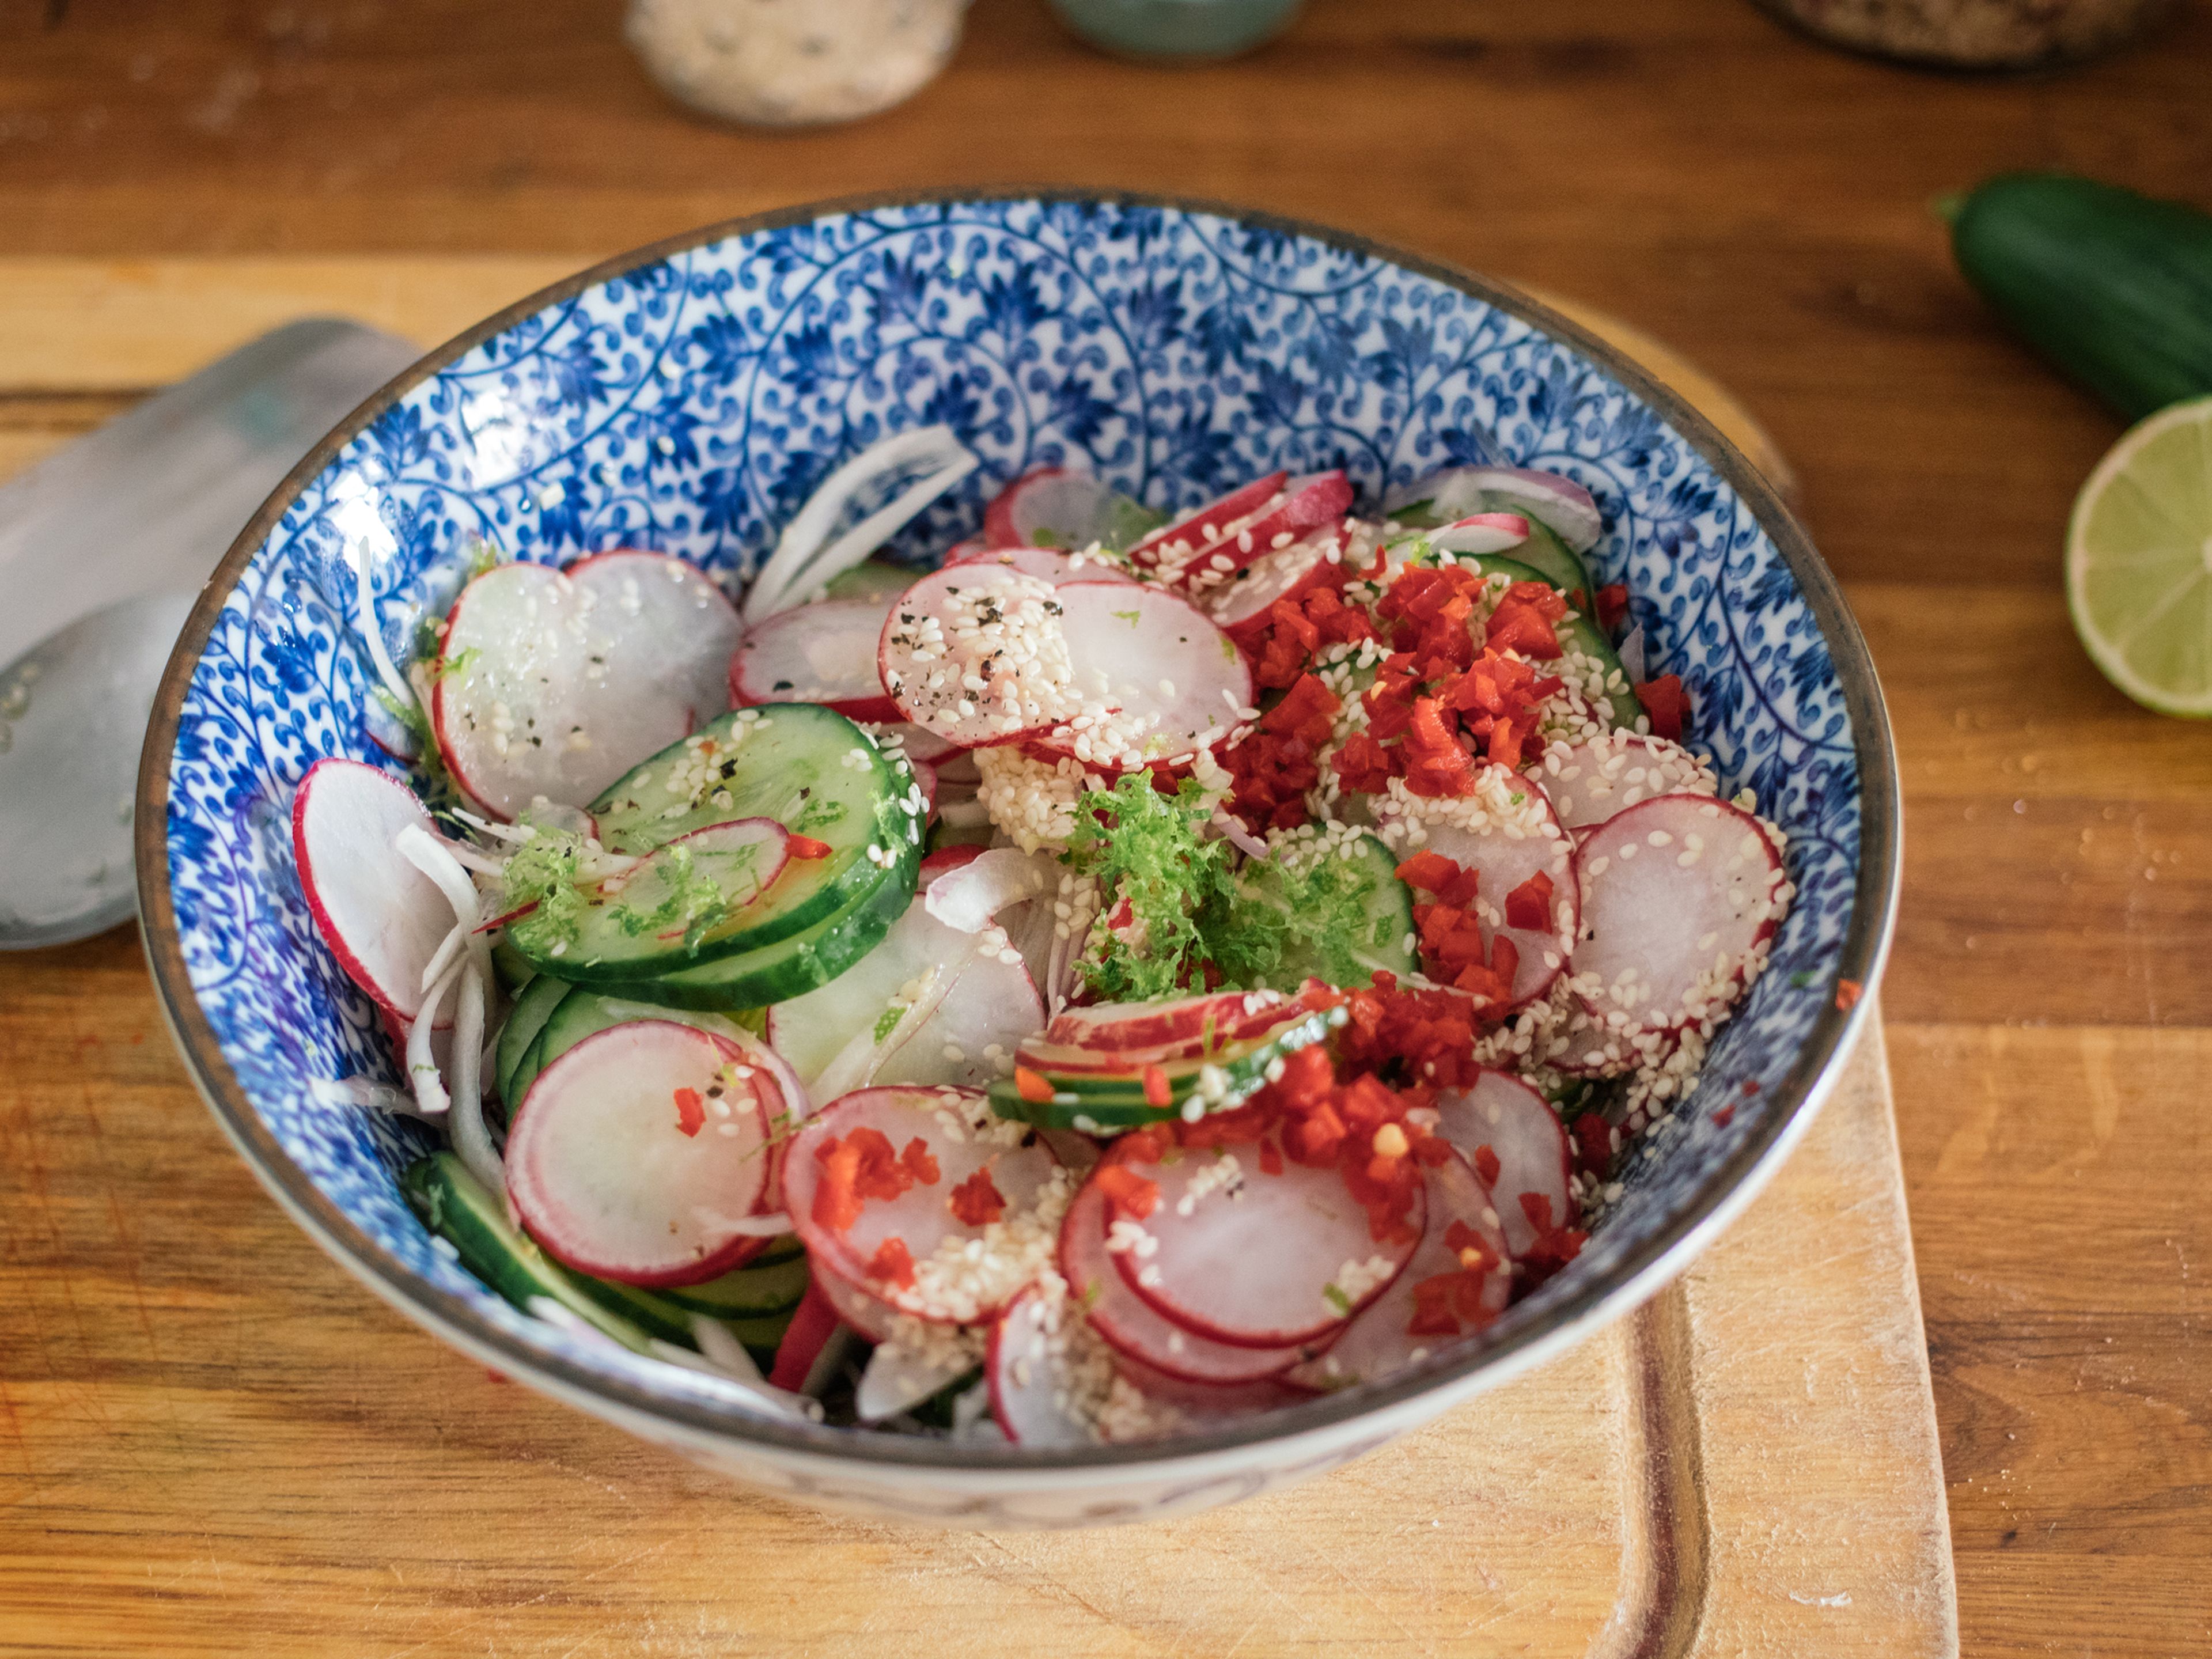 In the meantime, thinly slice cucumber, radishes, and shallot. Add rice vinegar, zest and juice of half of a lime, finely chopped chili, peanut oil, soy sauce, and sesame seeds to a large bowl. Stir to combine and season with salt and pepper to taste. Add cut vegetables, mix with dressing, and let sit until serving.